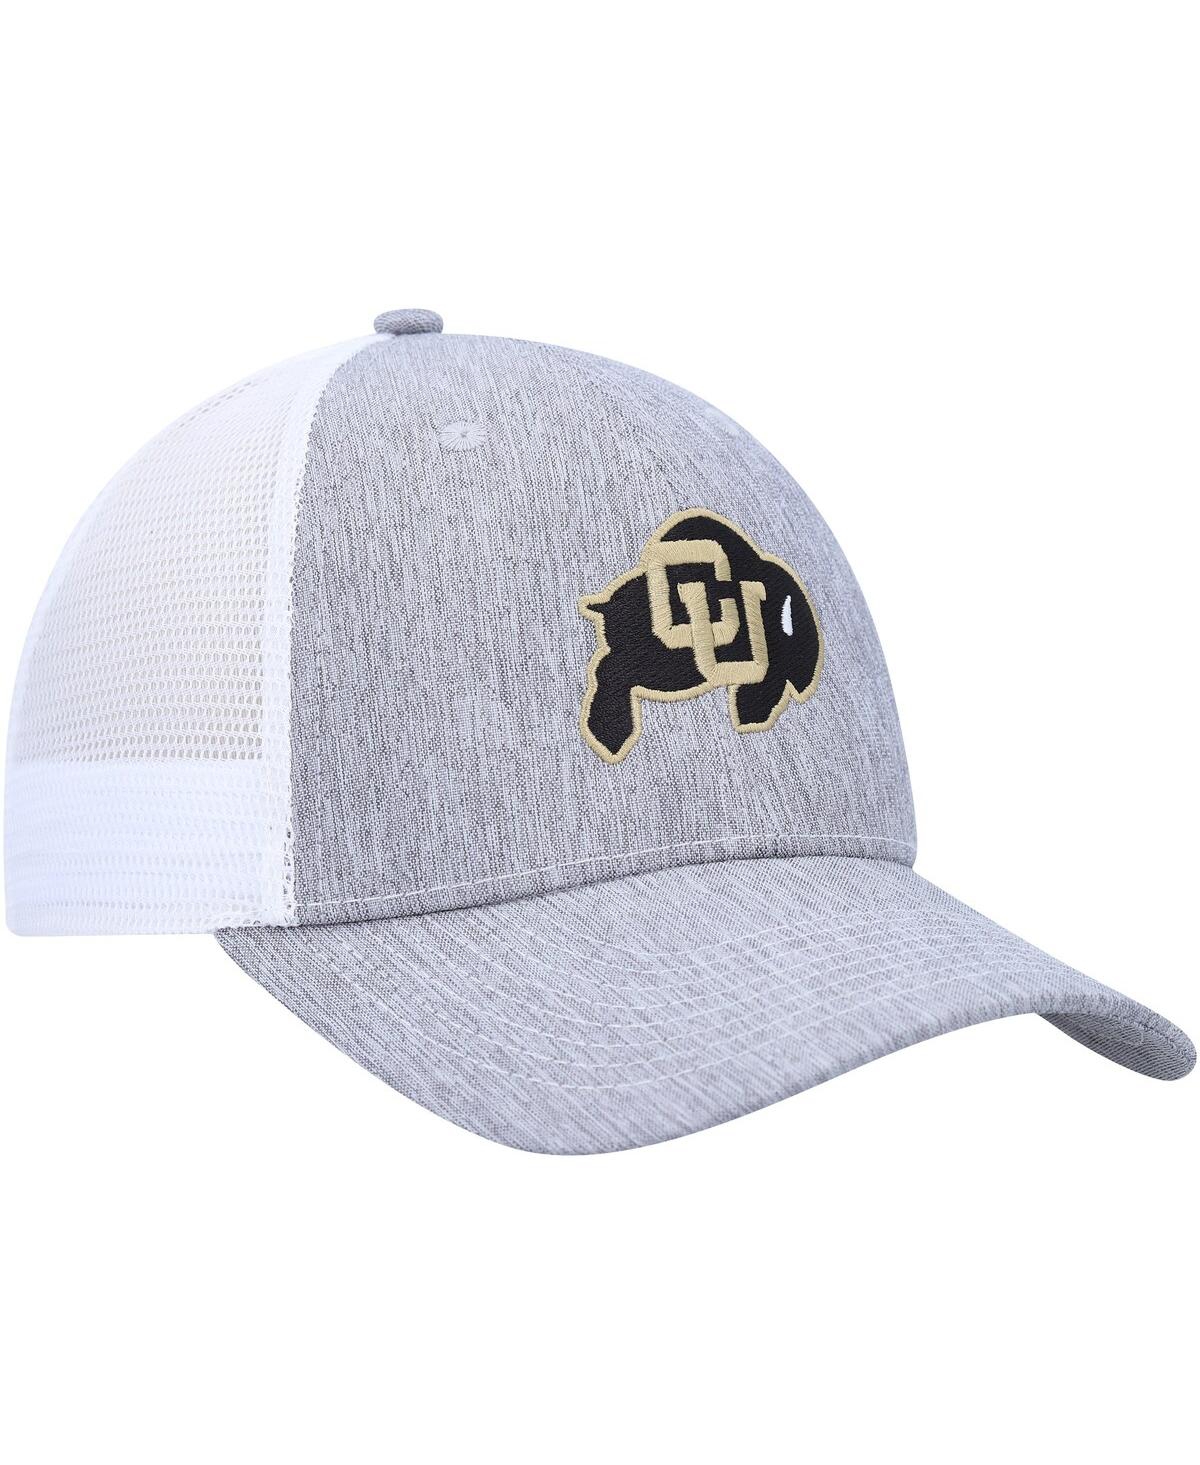 Shop Ahead Men's  Charcoal, White Colorado Buffaloes Brant Trucker Adjustable Hat In Charcoal,white